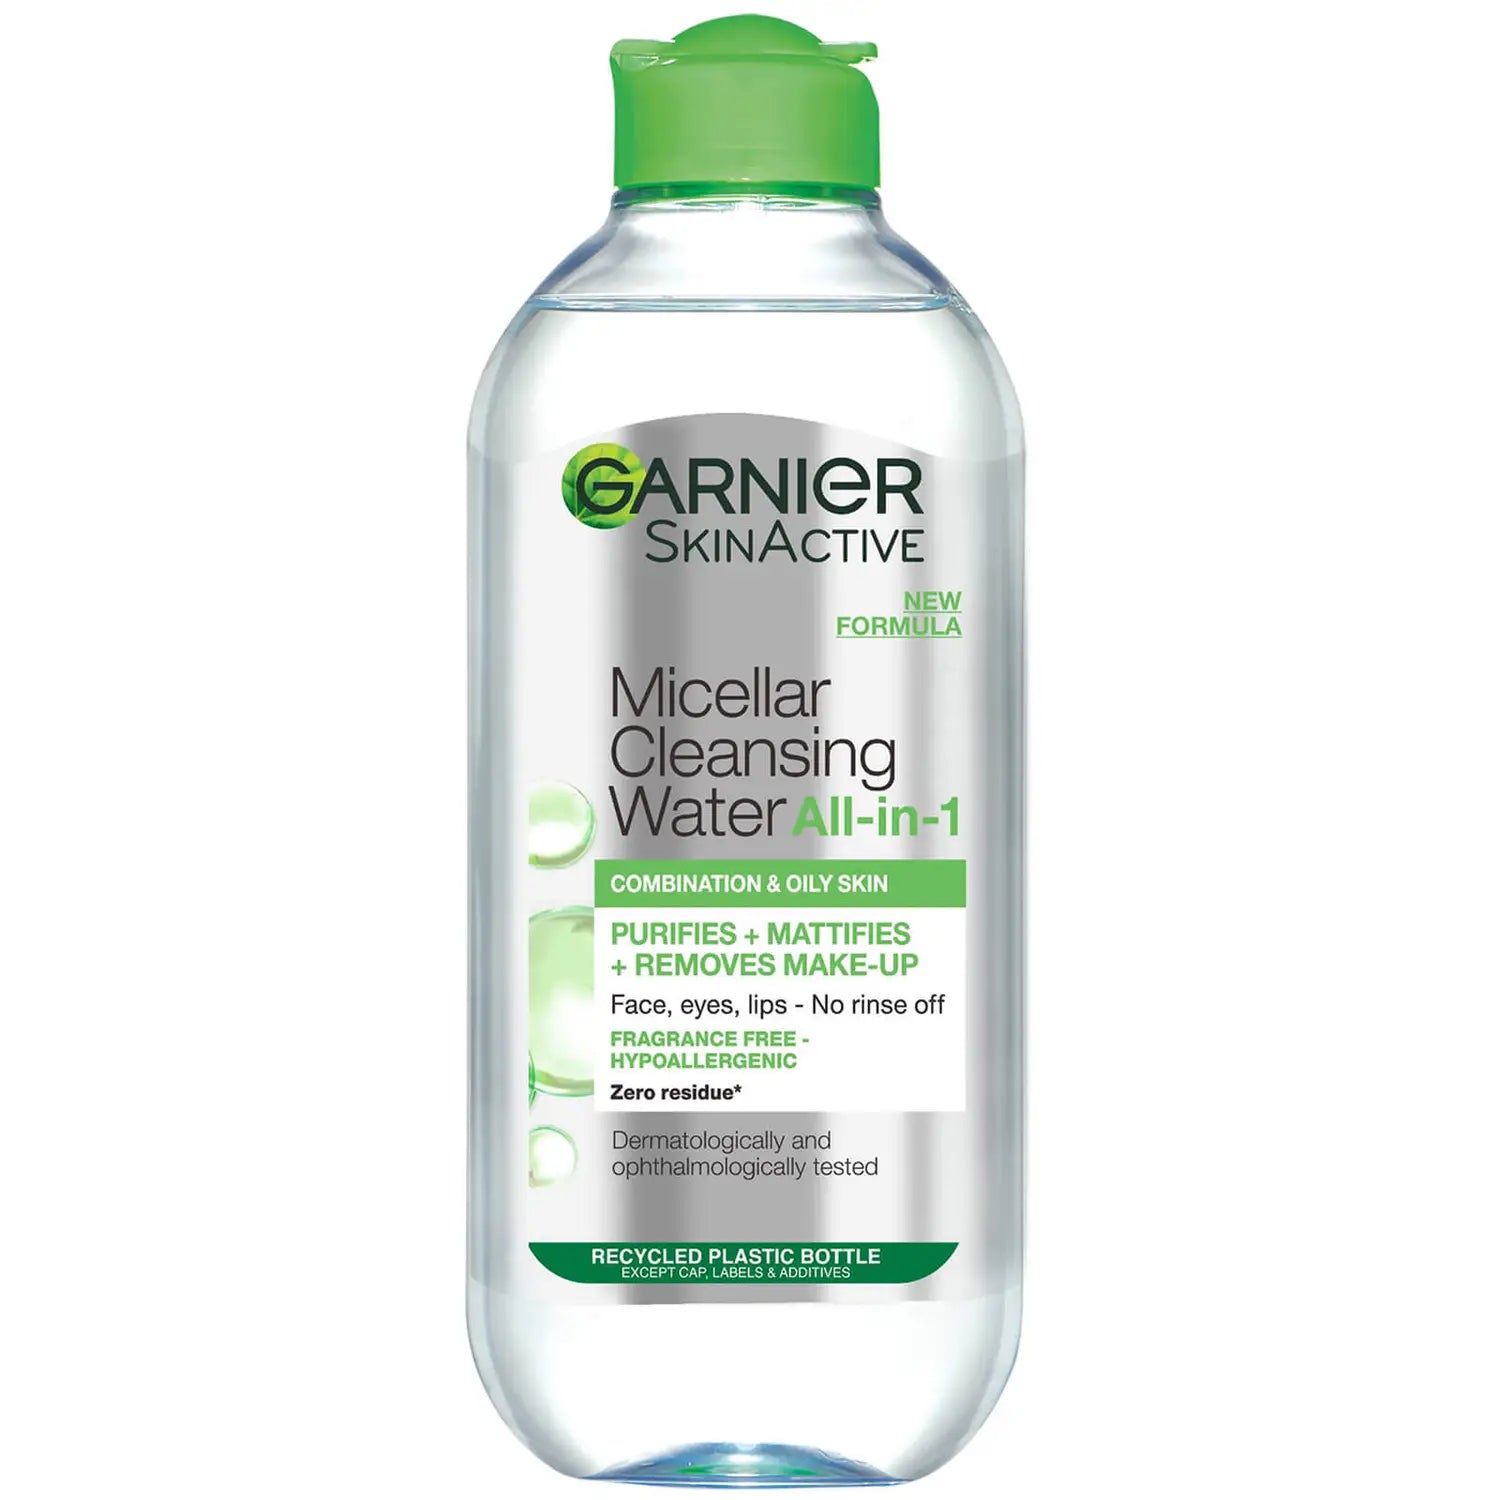 Micellar Cleansing Water For Combination & Oily Skin 400ml